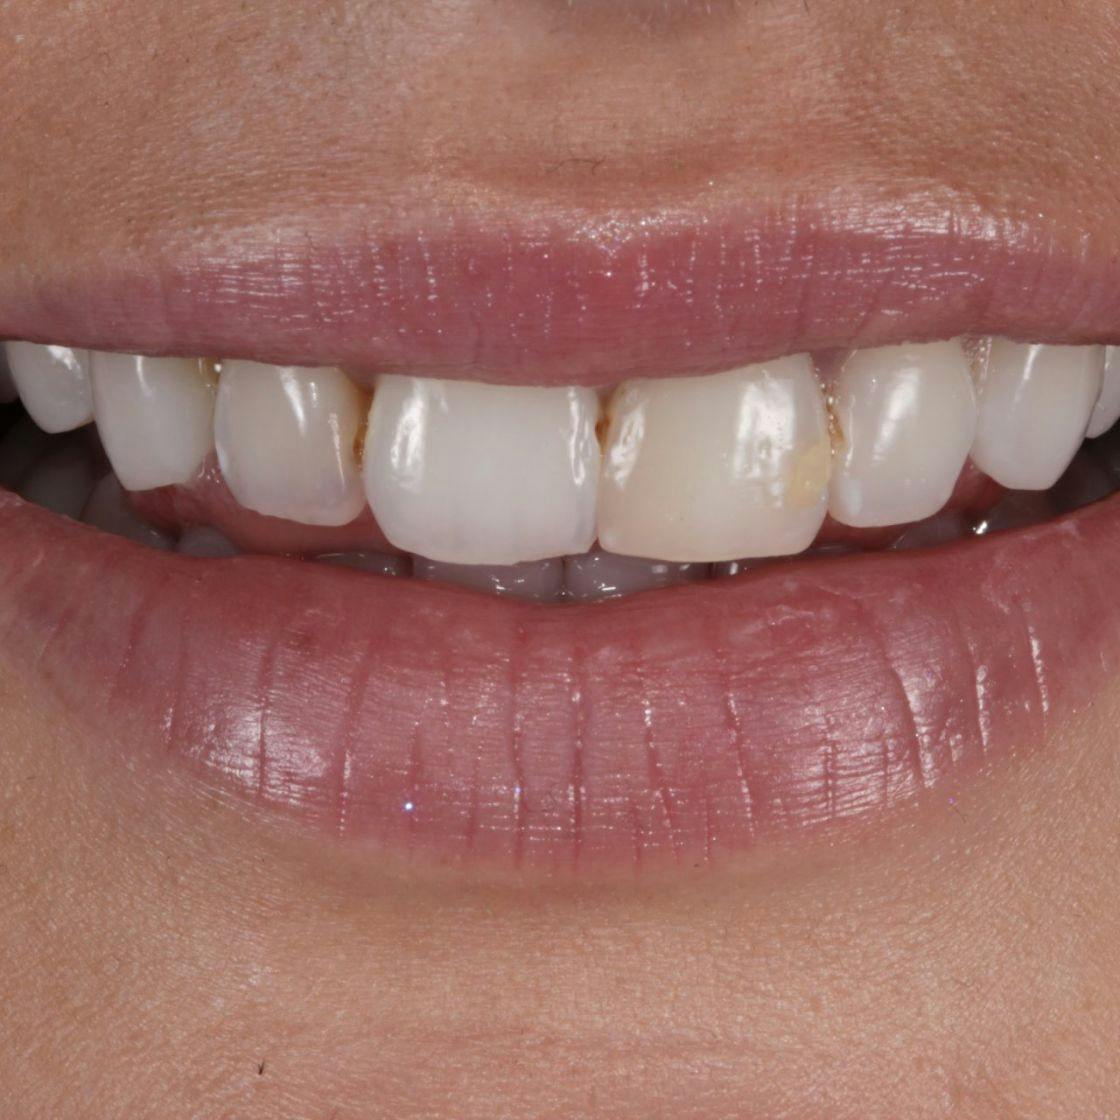 Woman's smile and teeth before composite bonding treatment